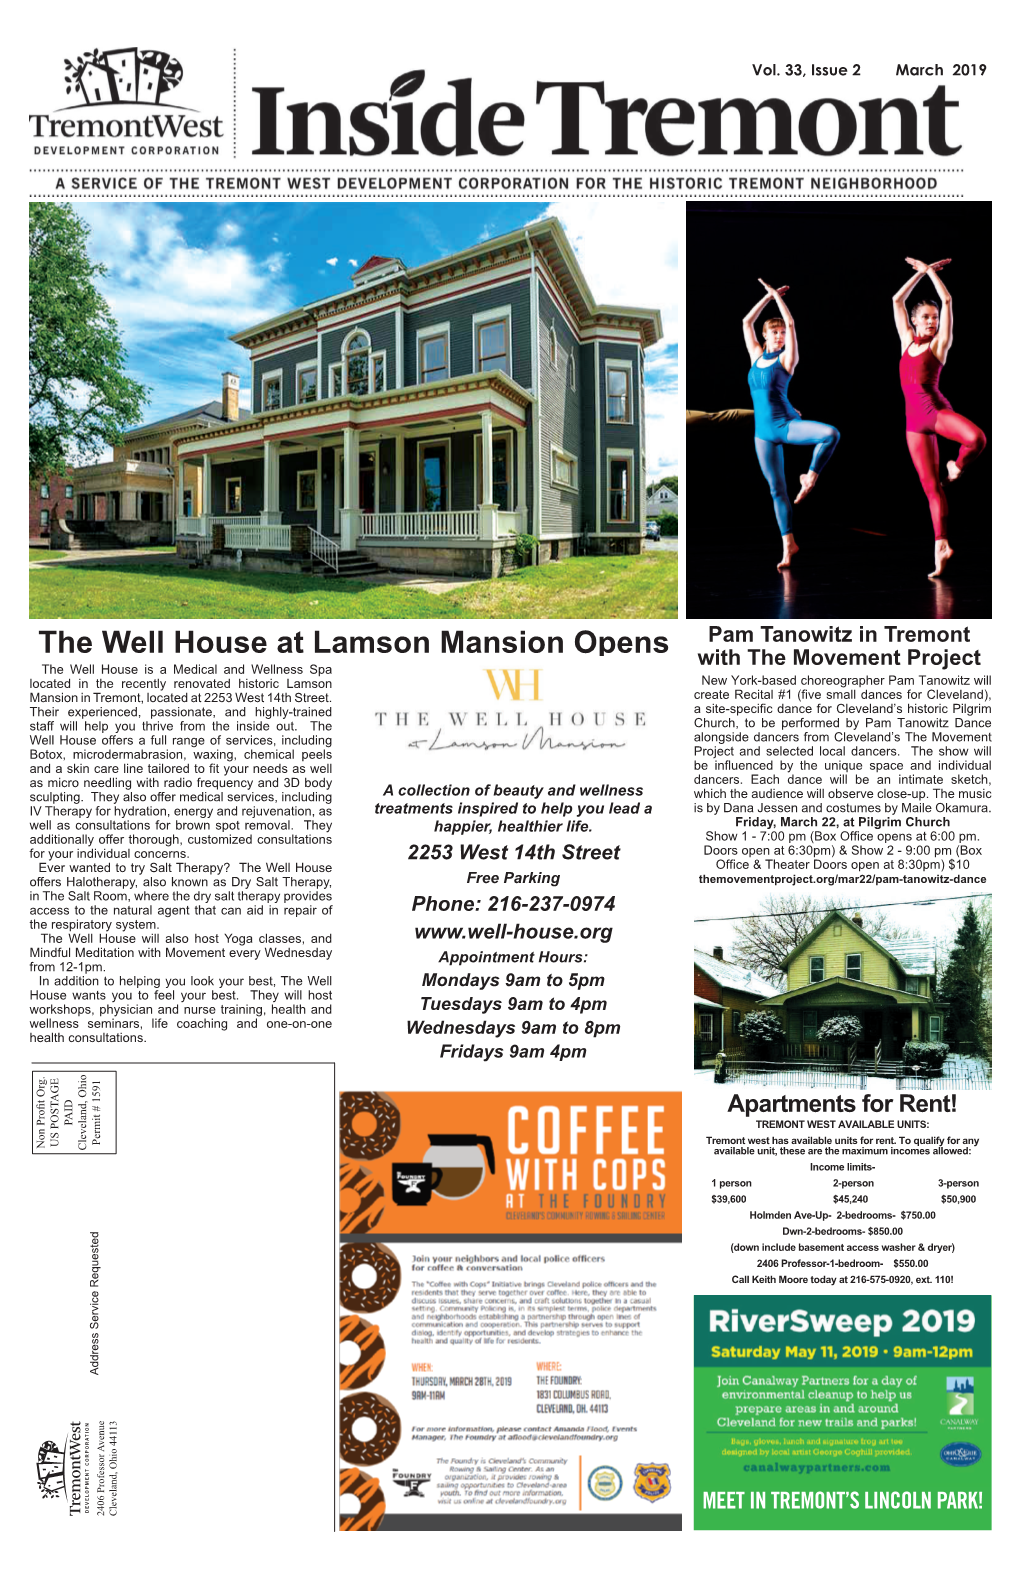 The Well House at Lamson Mansion Opens